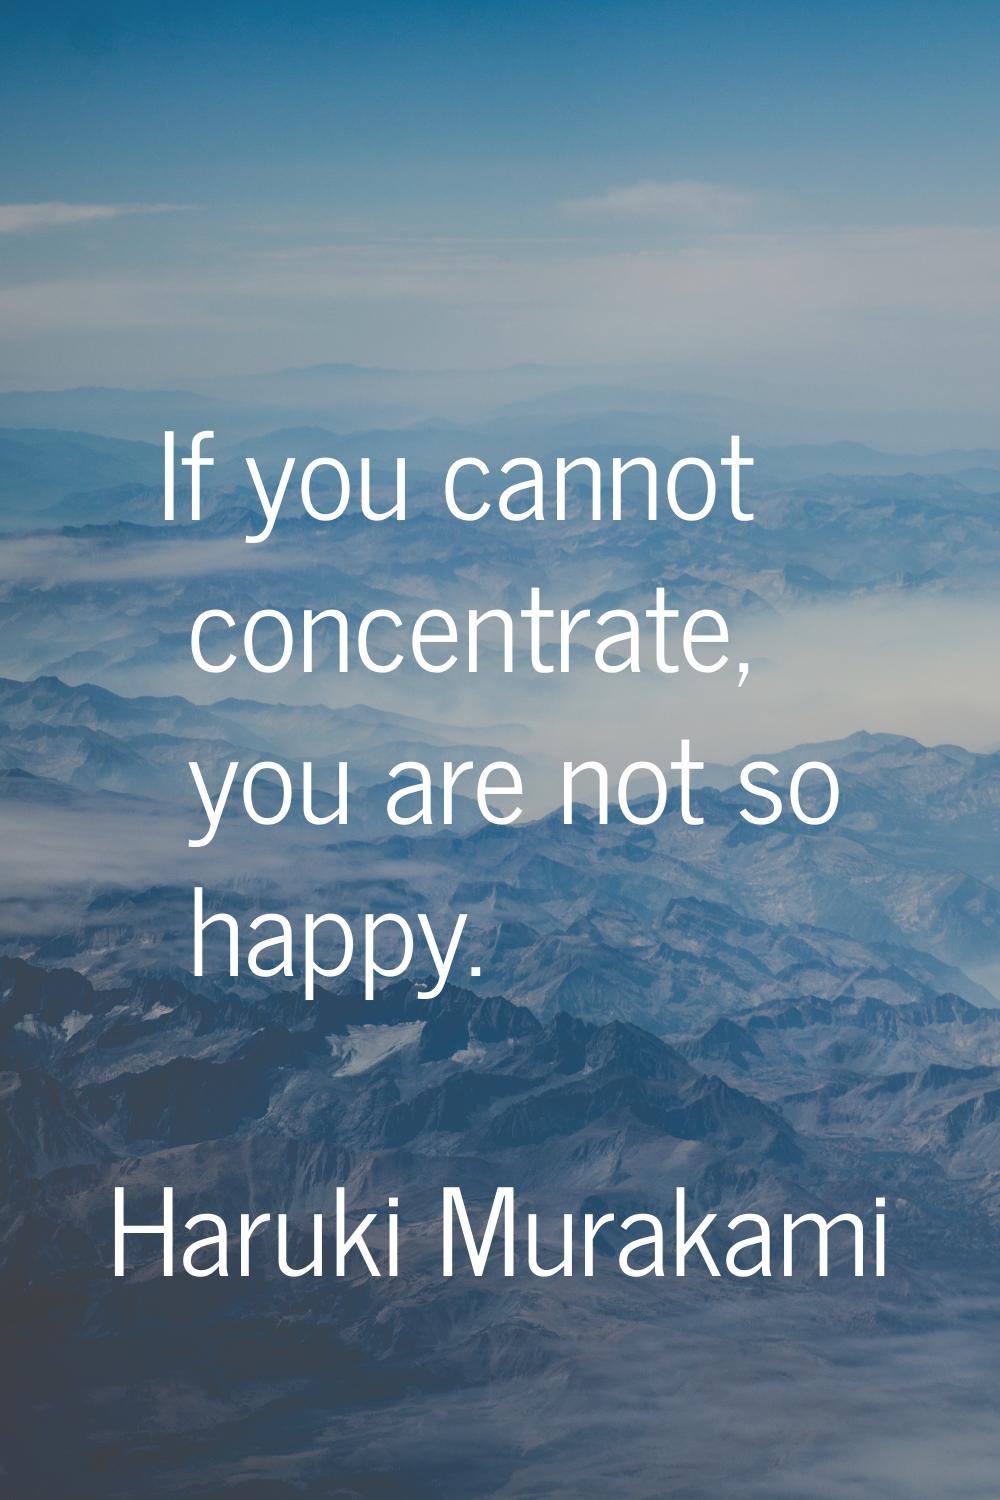 If you cannot concentrate, you are not so happy.